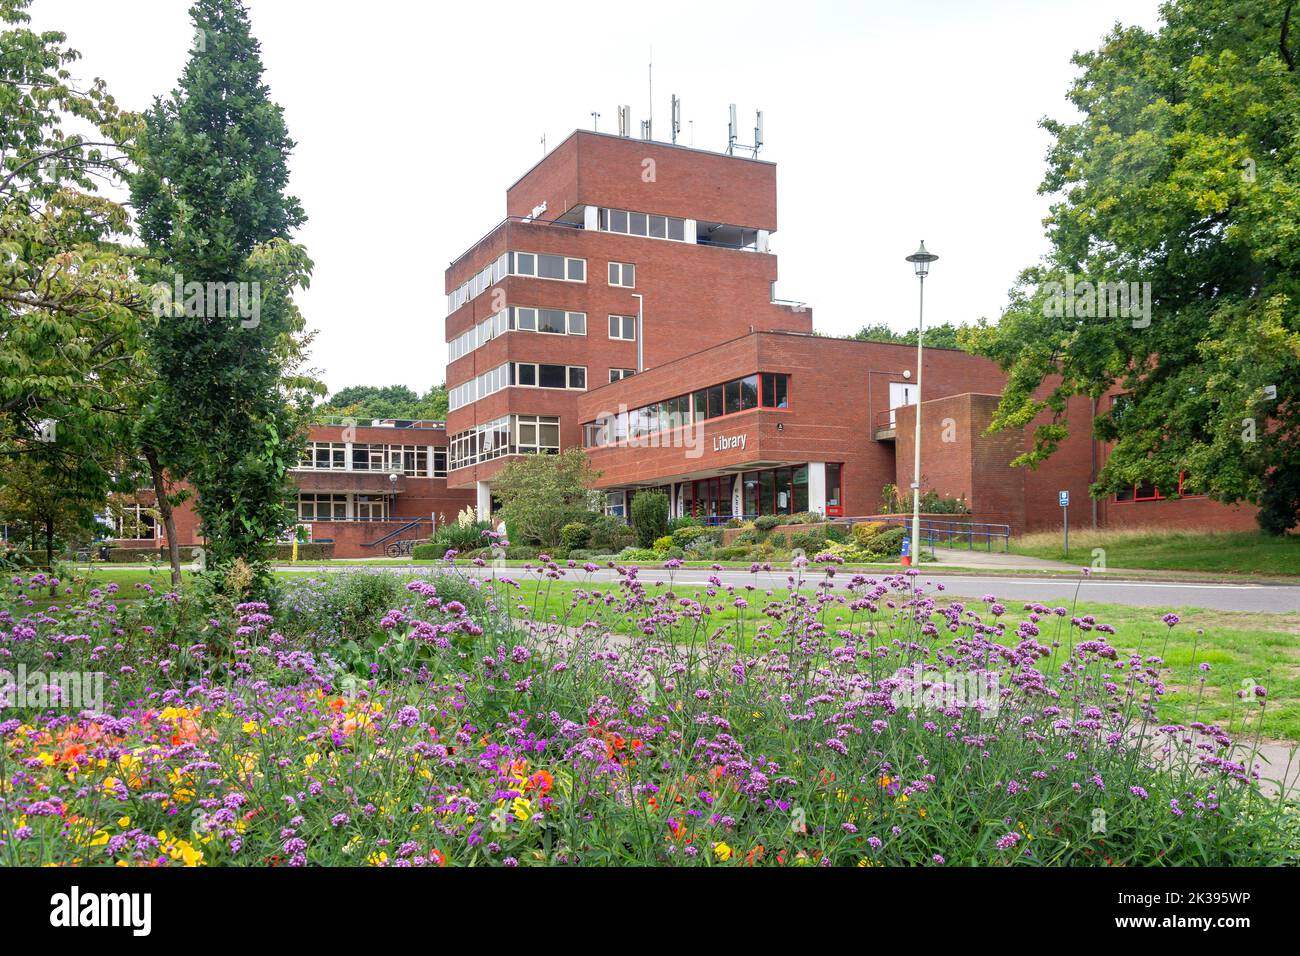 Welwyn Garden City Central Library, The Campus, Welwyn Garden City Centre, Hertfordshire, England, Großbritannien Stockfoto